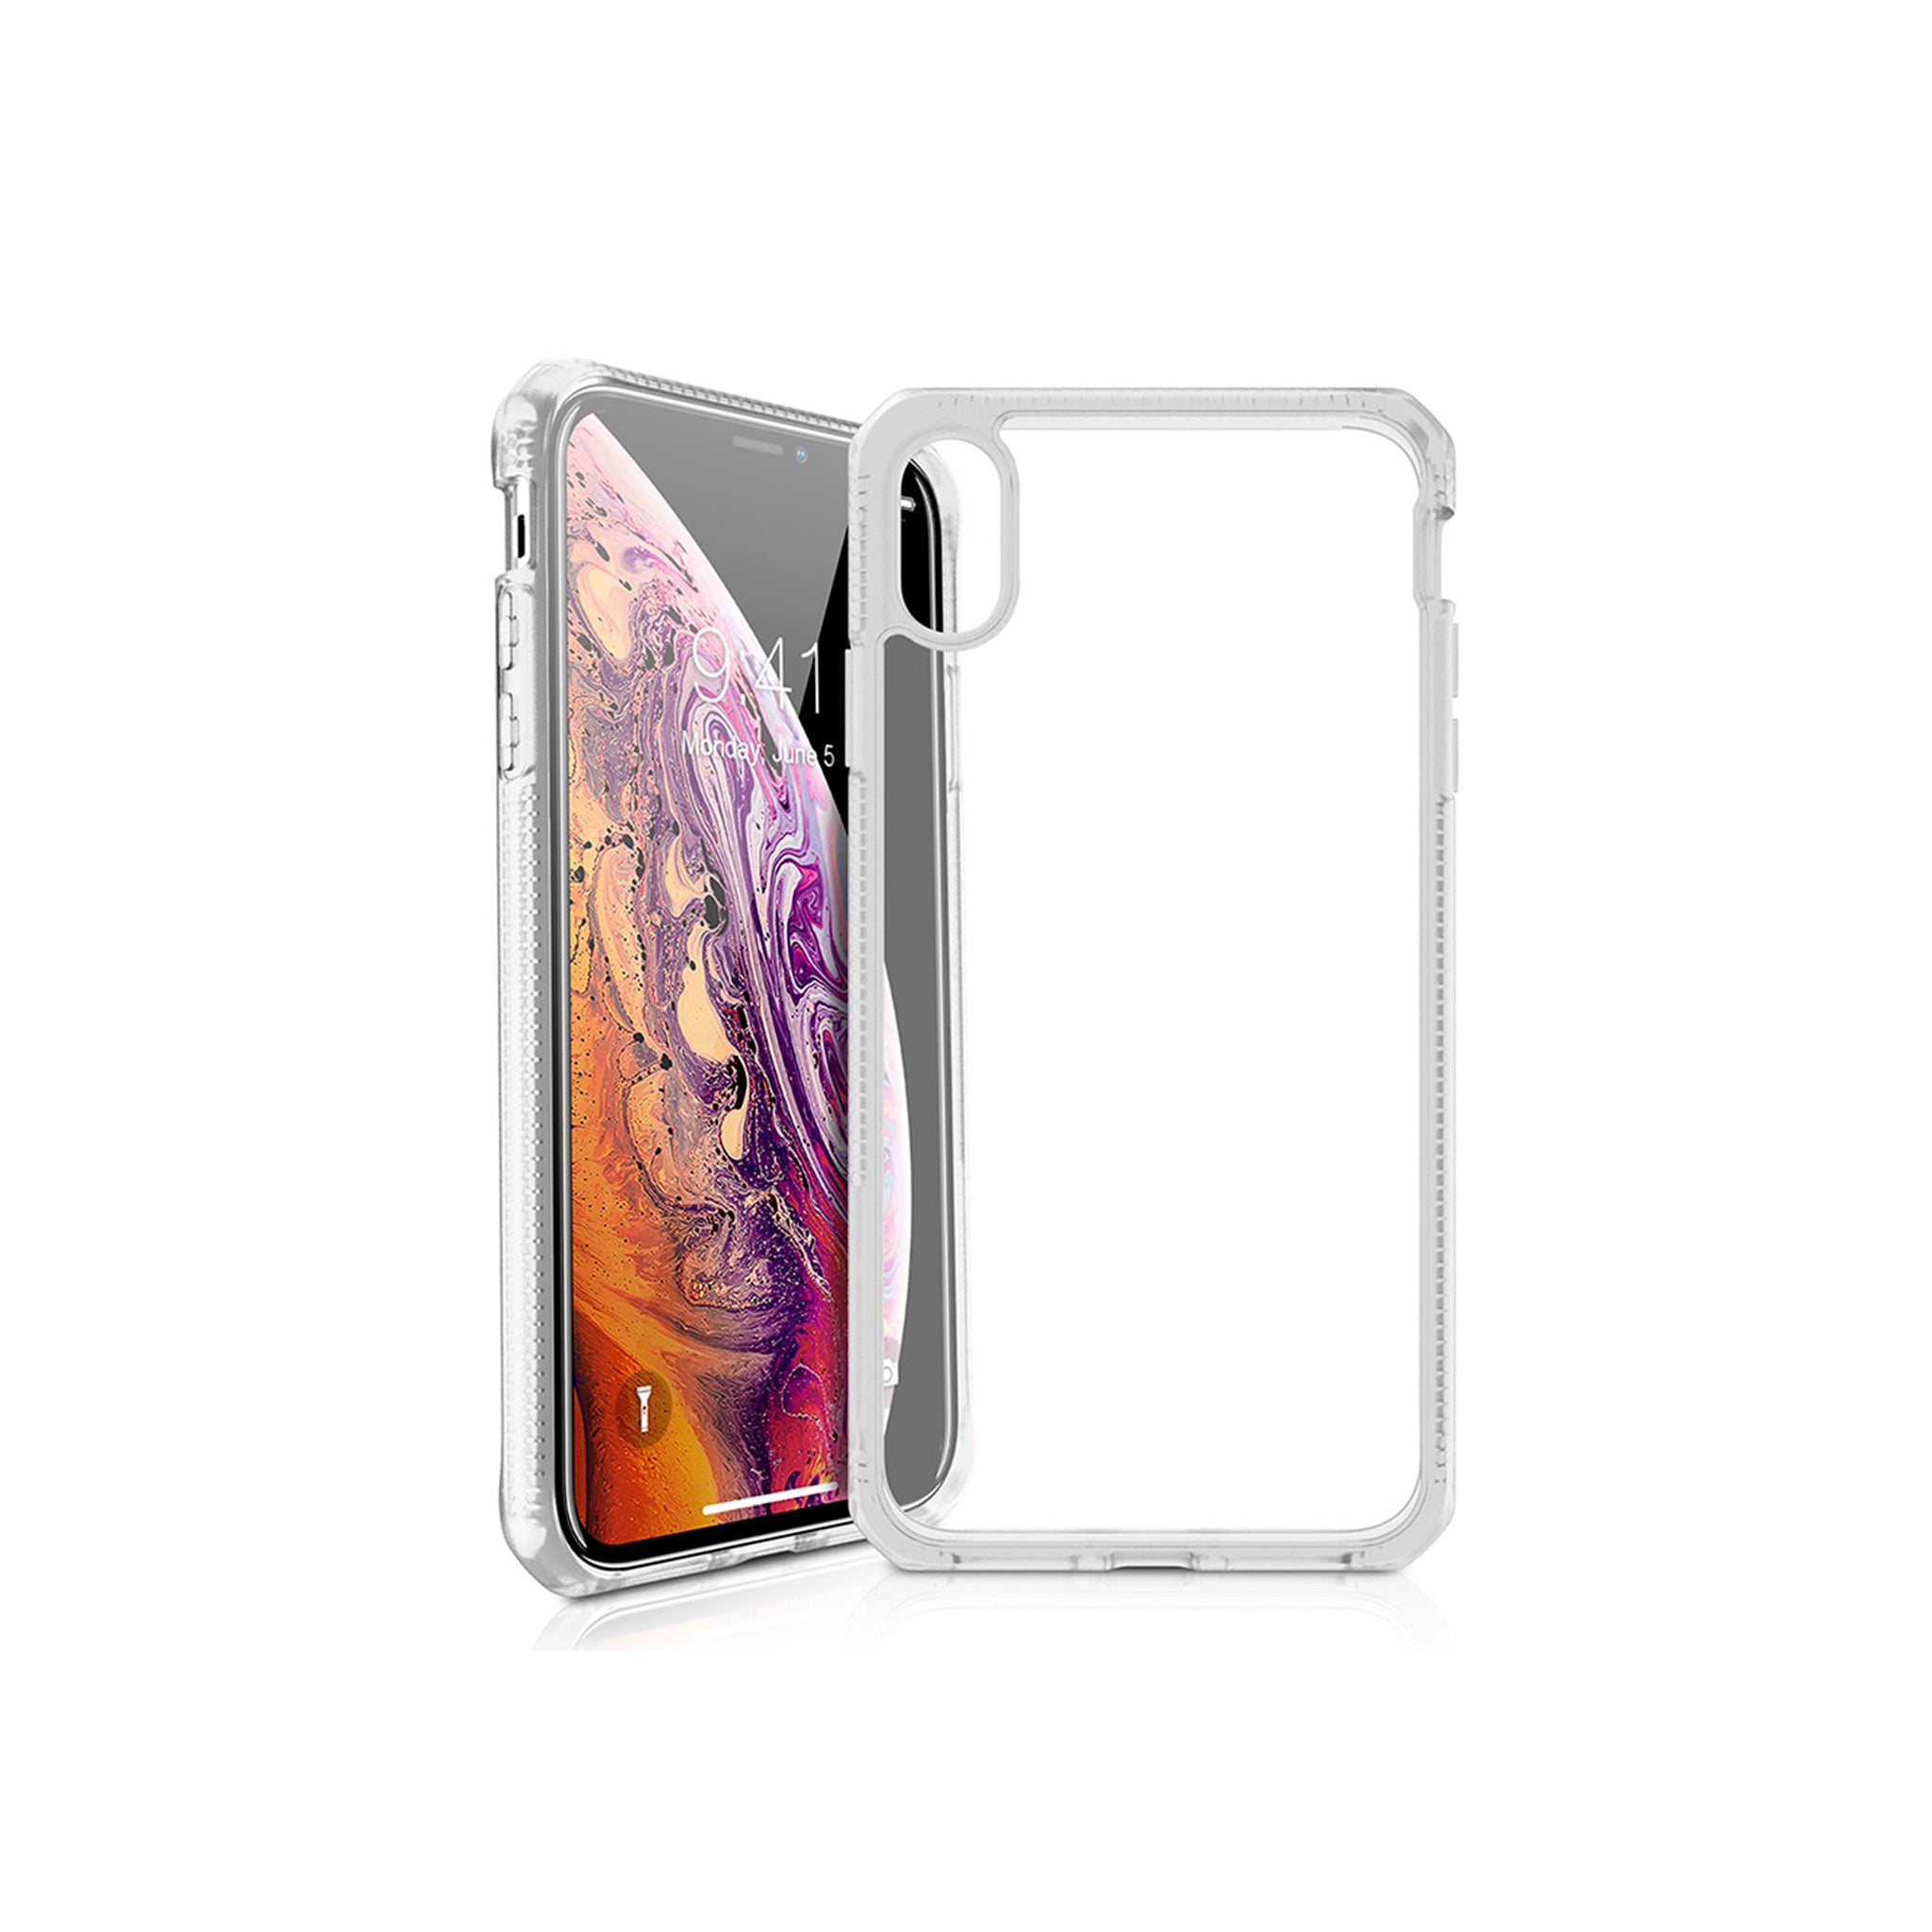 Itskins - Hybrid Frost MKII Case for Apple iPhone XS / X - Transparent